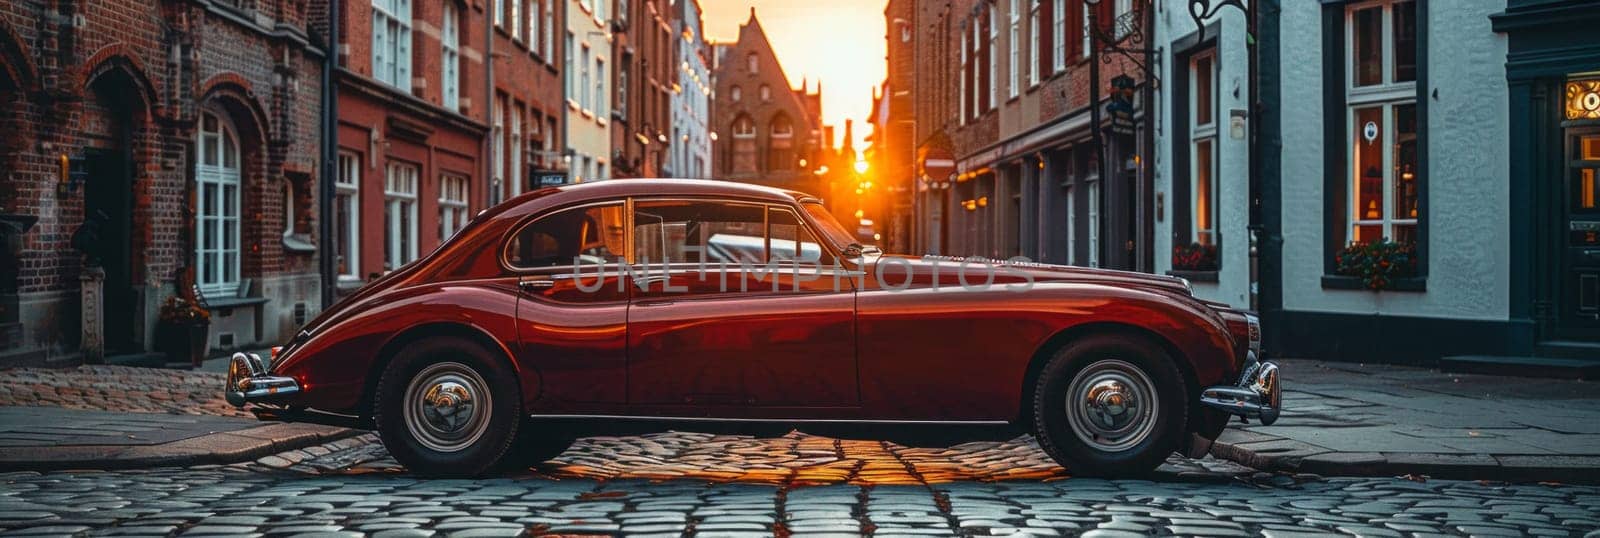 A vibrant red car is parked gracefully on a rustic cobblestone street, exuding elegance and charm under the warm sunlight.